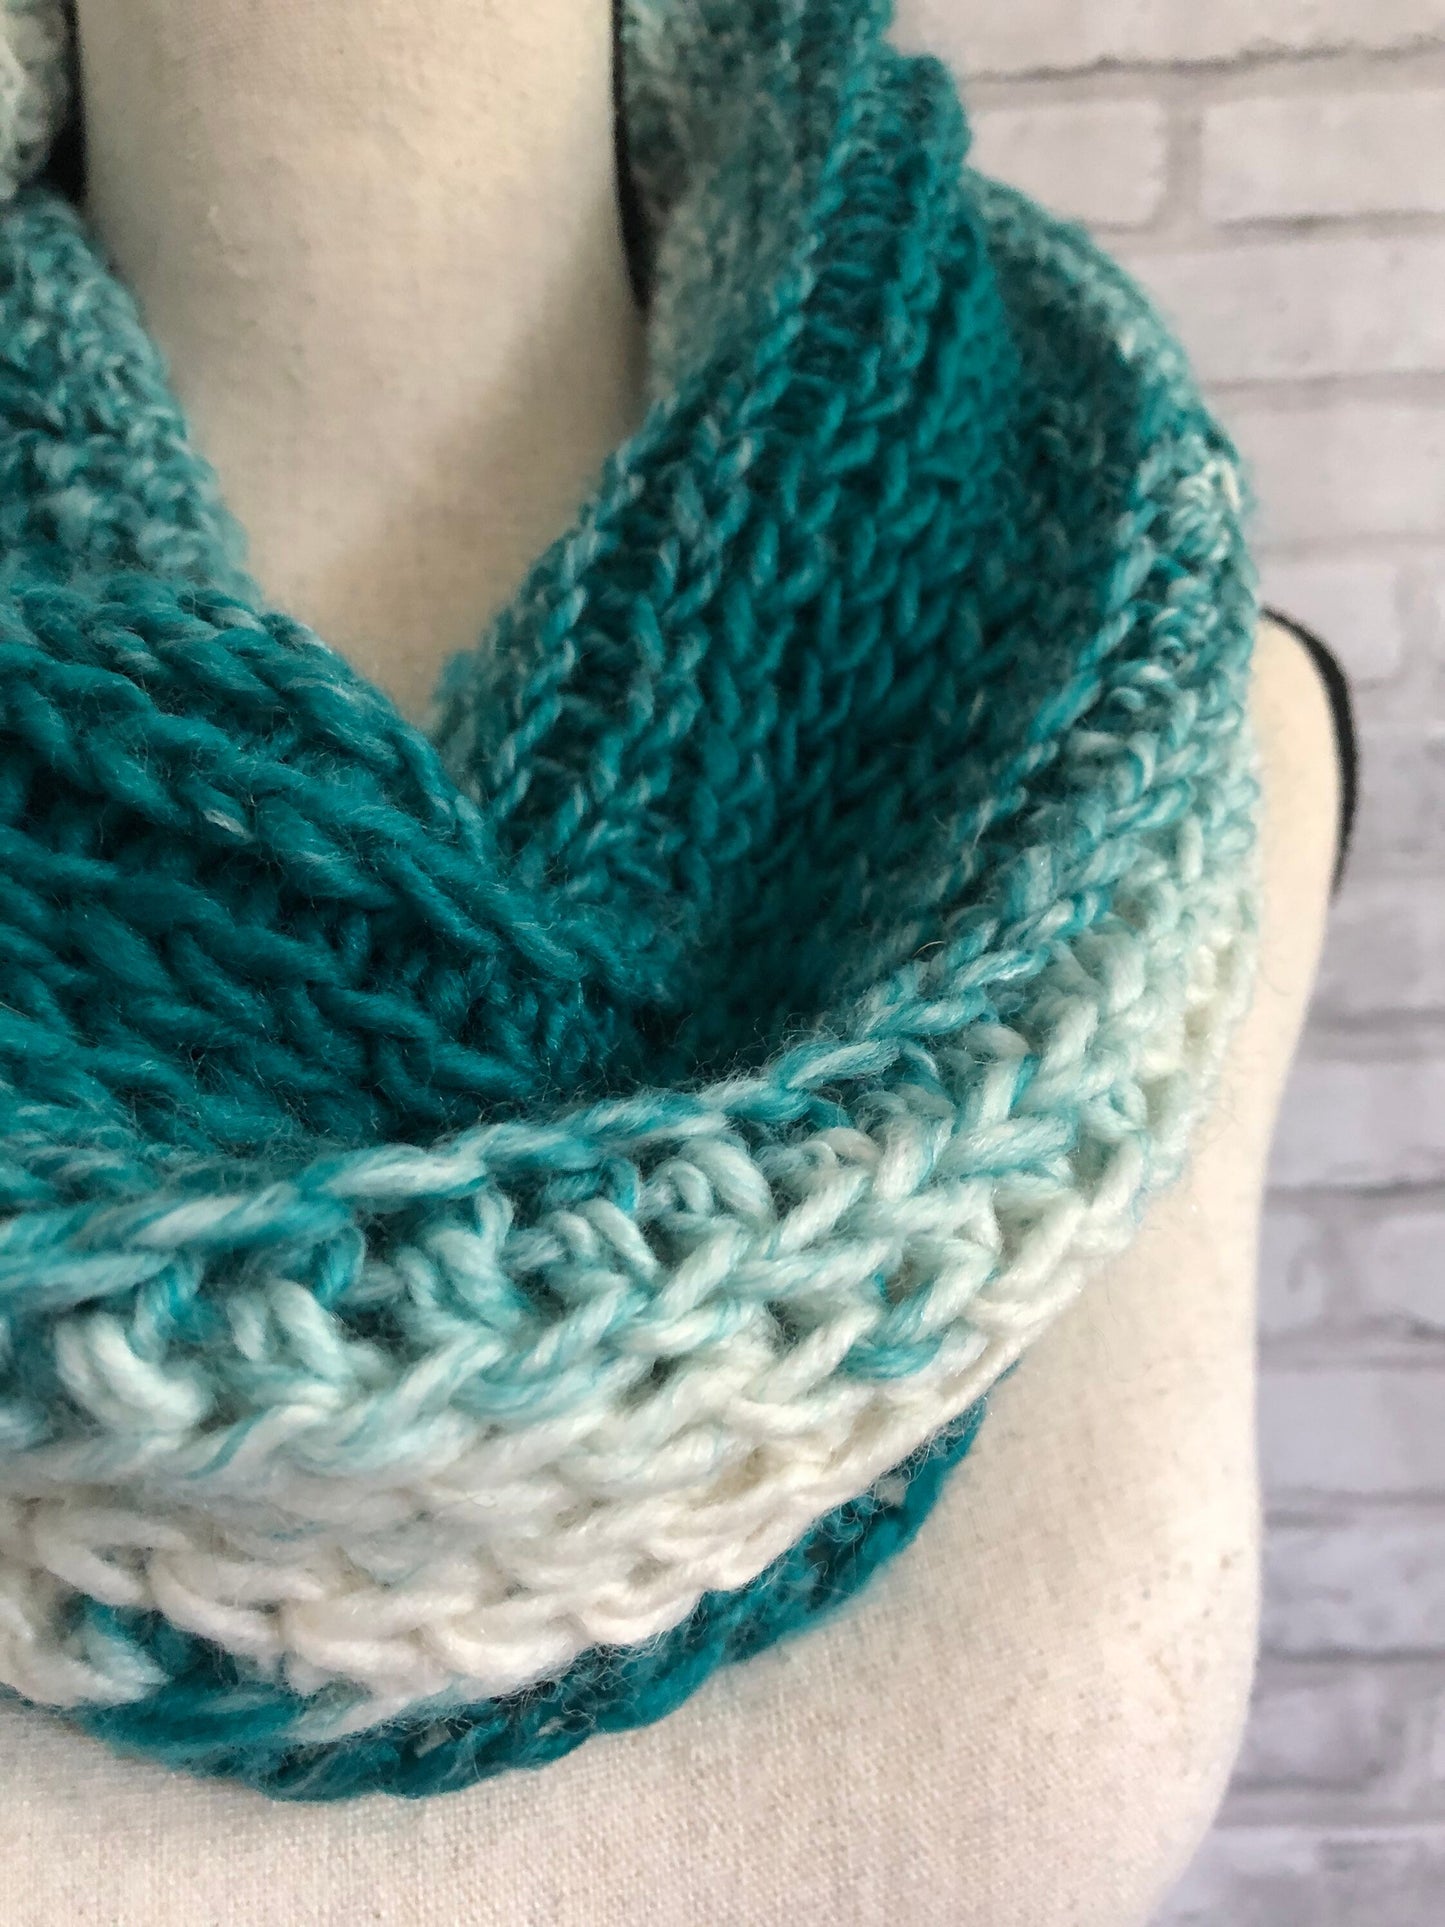 Knit Scarf. Teal Knit Scarf. Women’s Turquoise and Cream Infinity Scarf. Crochet Infinity Scarf.